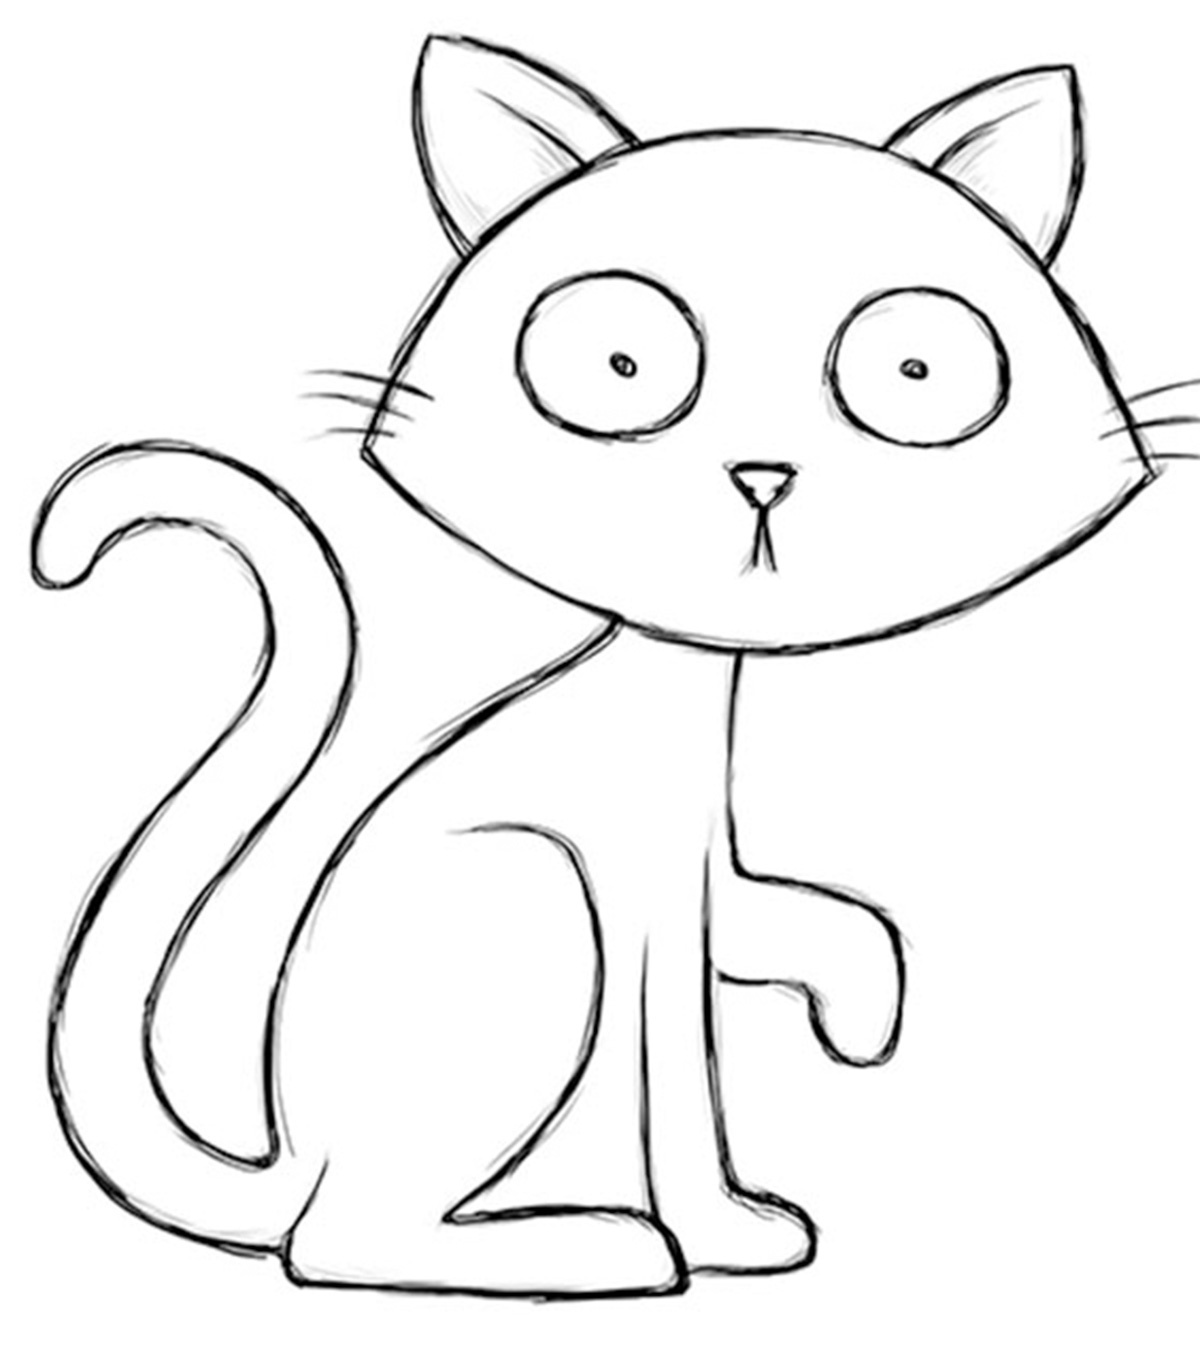 Cartoon Cat Horror Coloring Page - Coloring pages